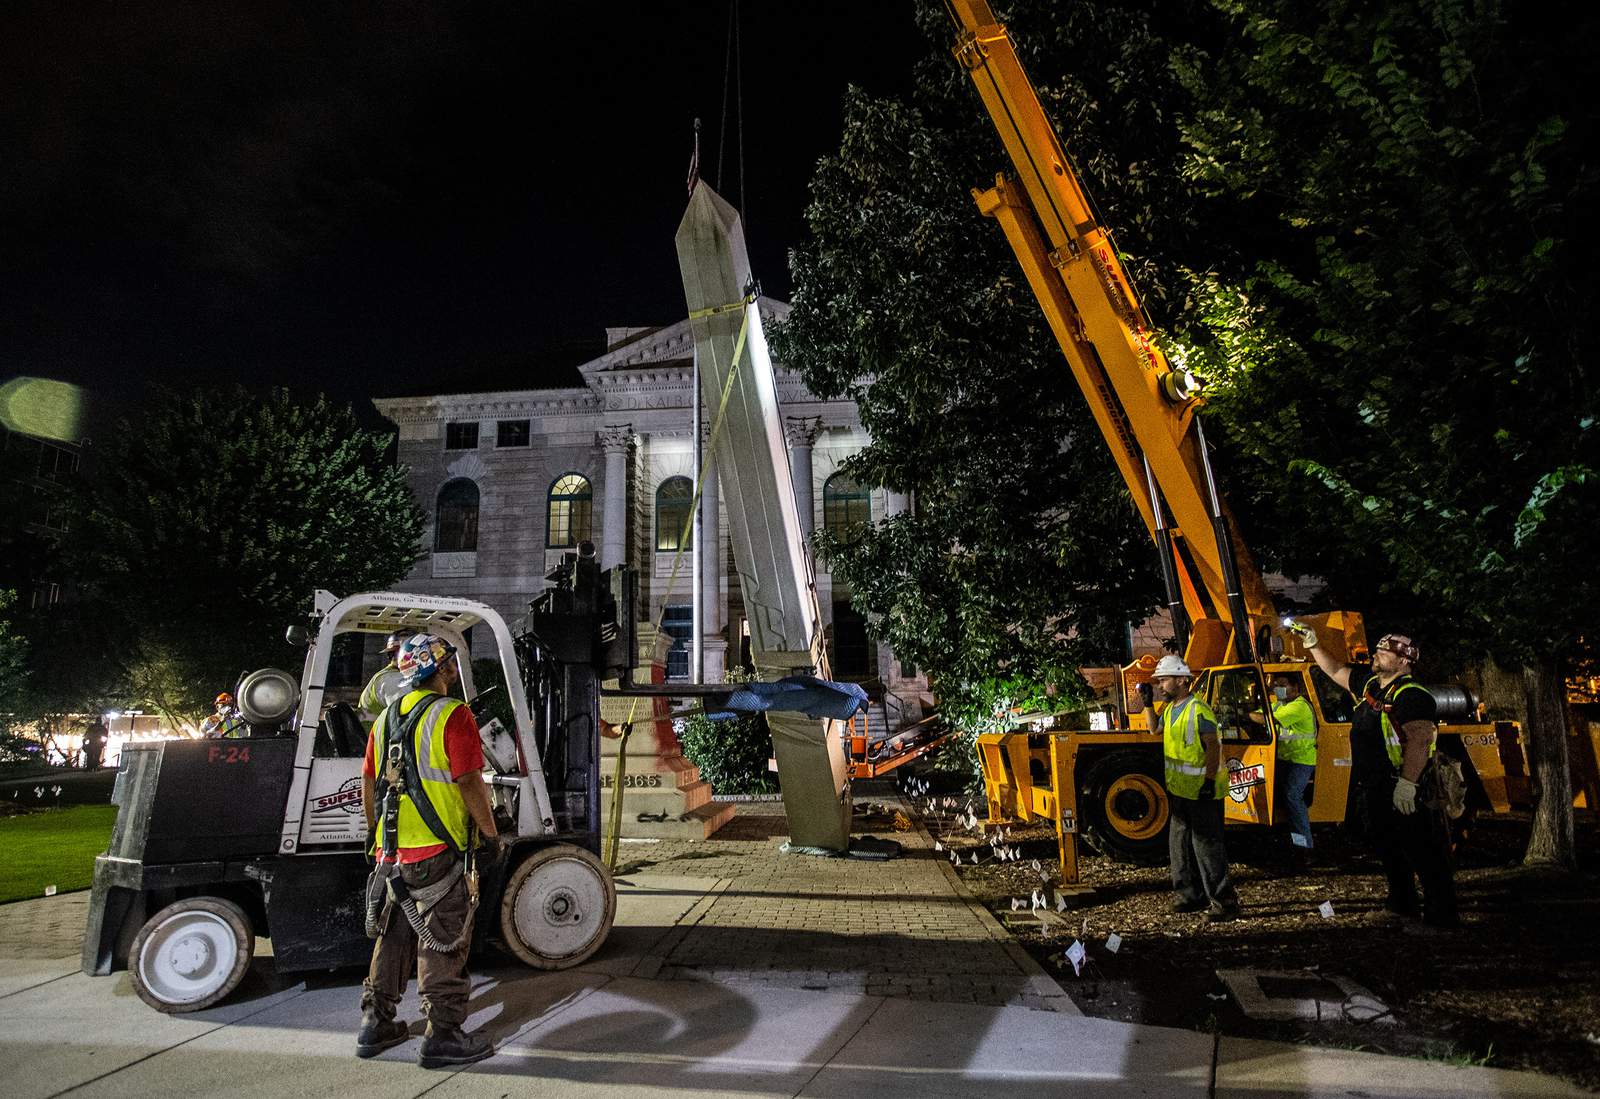 Confederate obelisk removed from Georgia square amid cheers